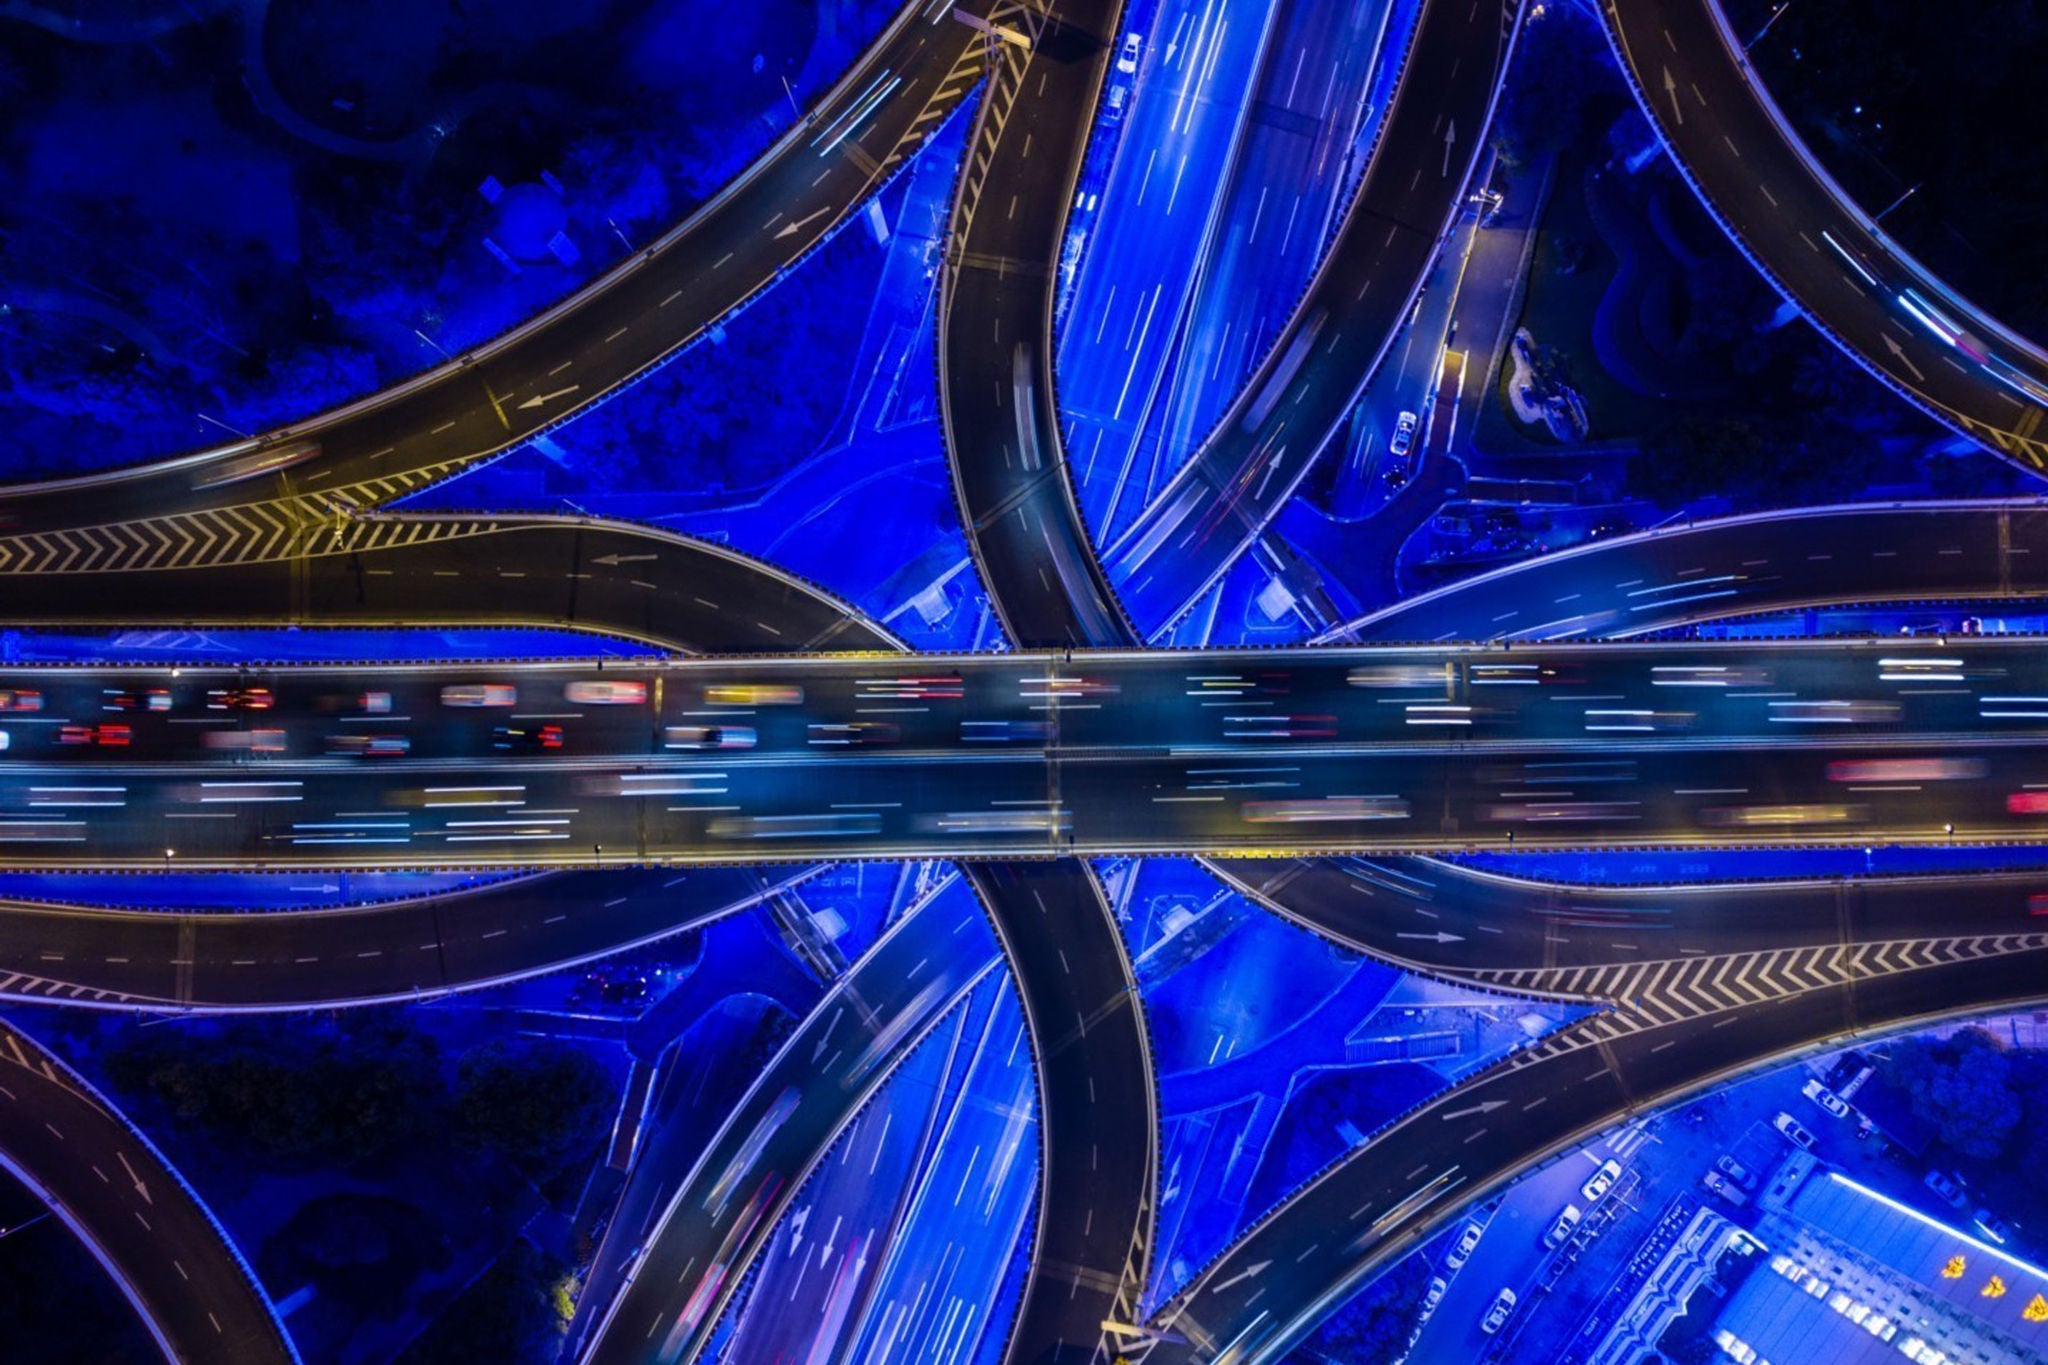 EY aerial view of flyover roads illuminated in blue light